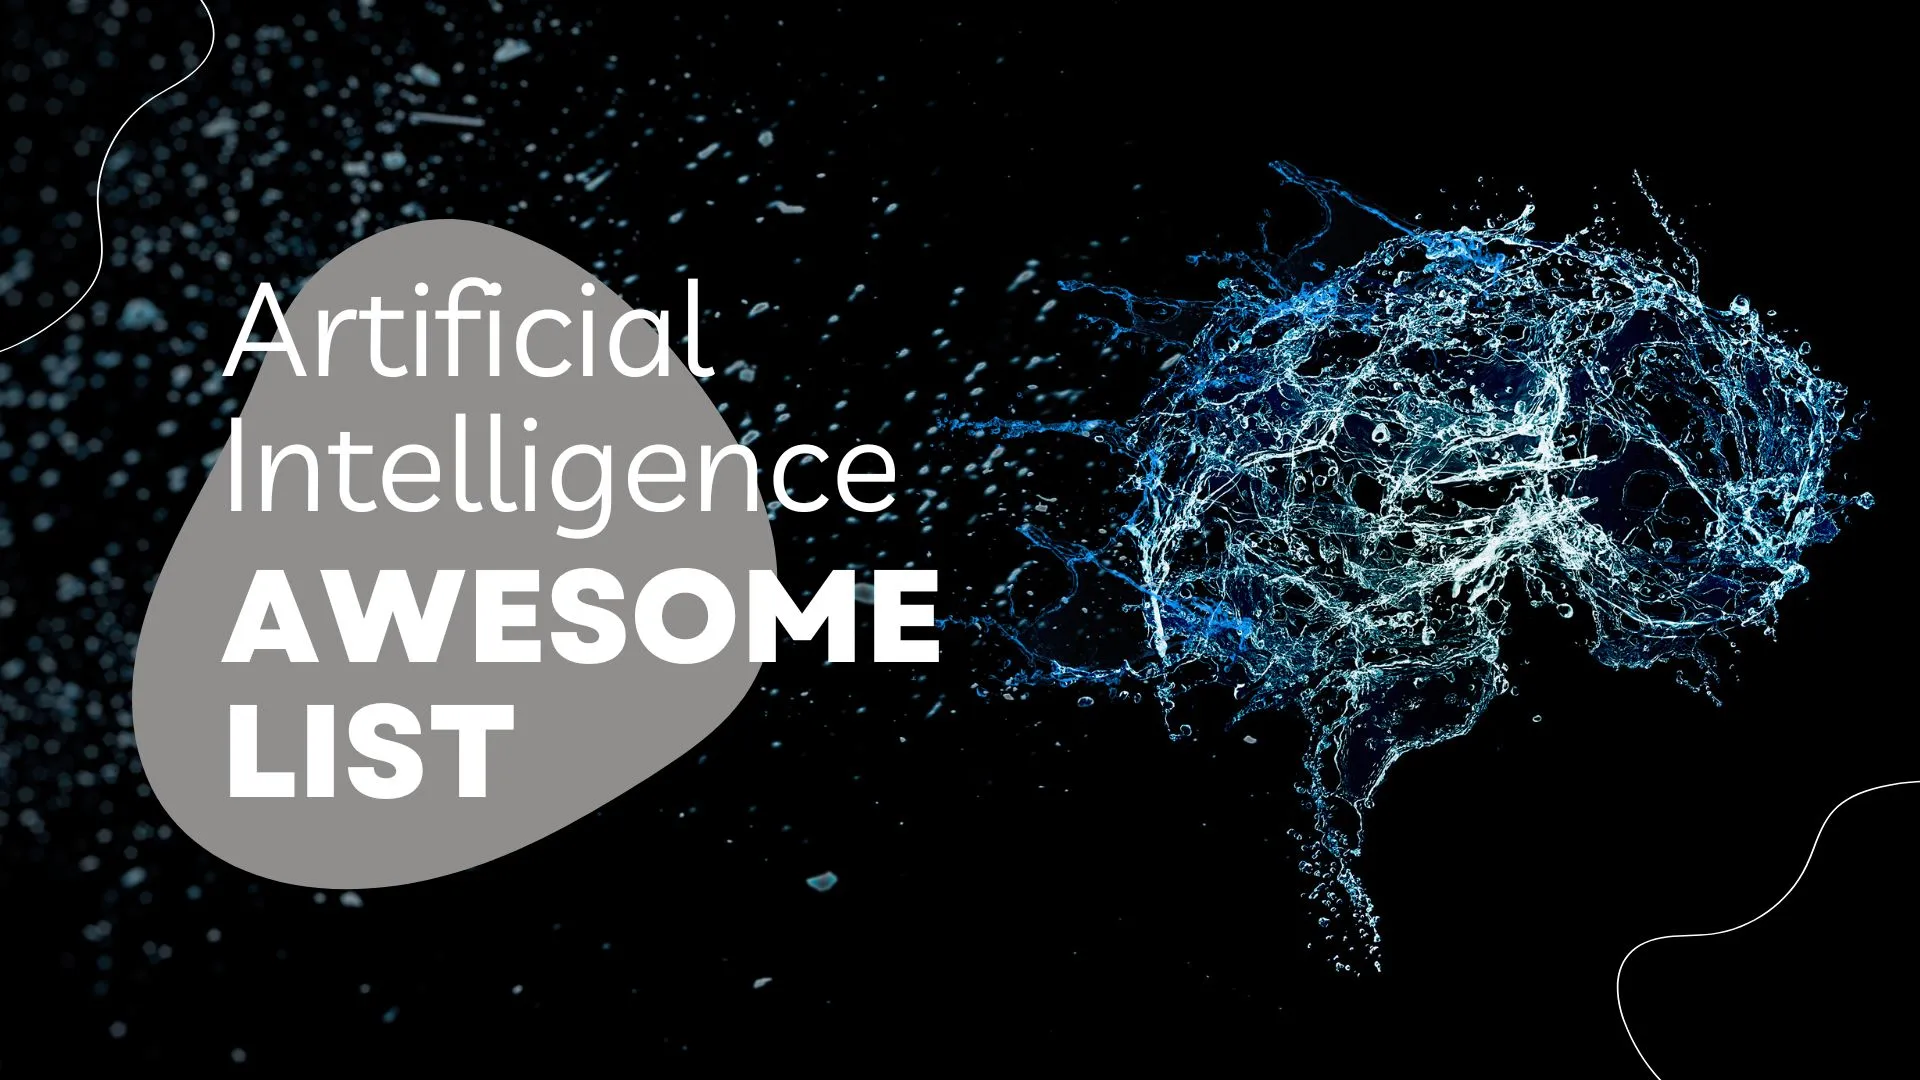 Artifical Intelligence Awesome List